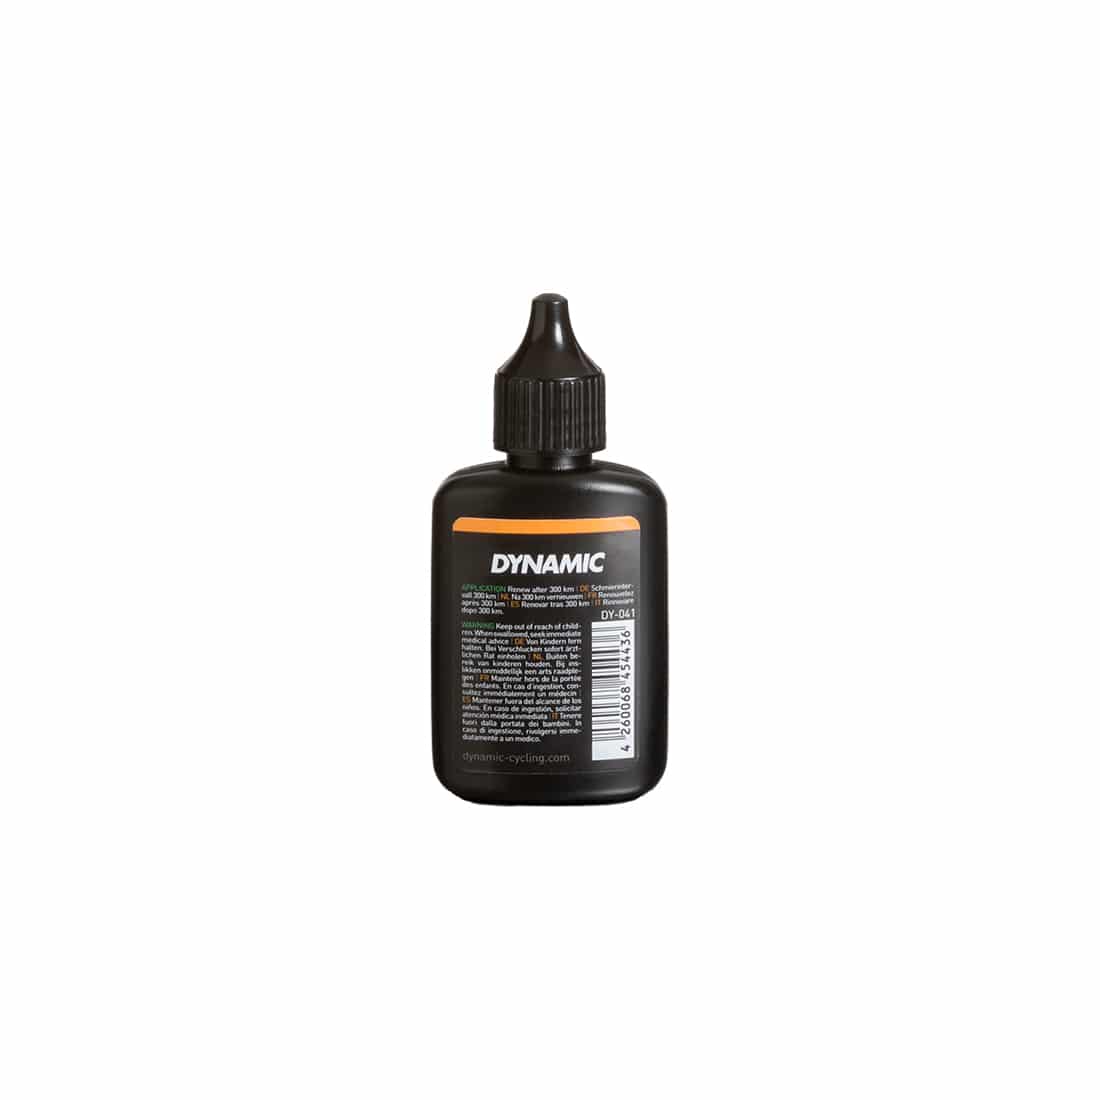 Dynamic All Round Lube Alpcross - 37ML - Cyclop.in